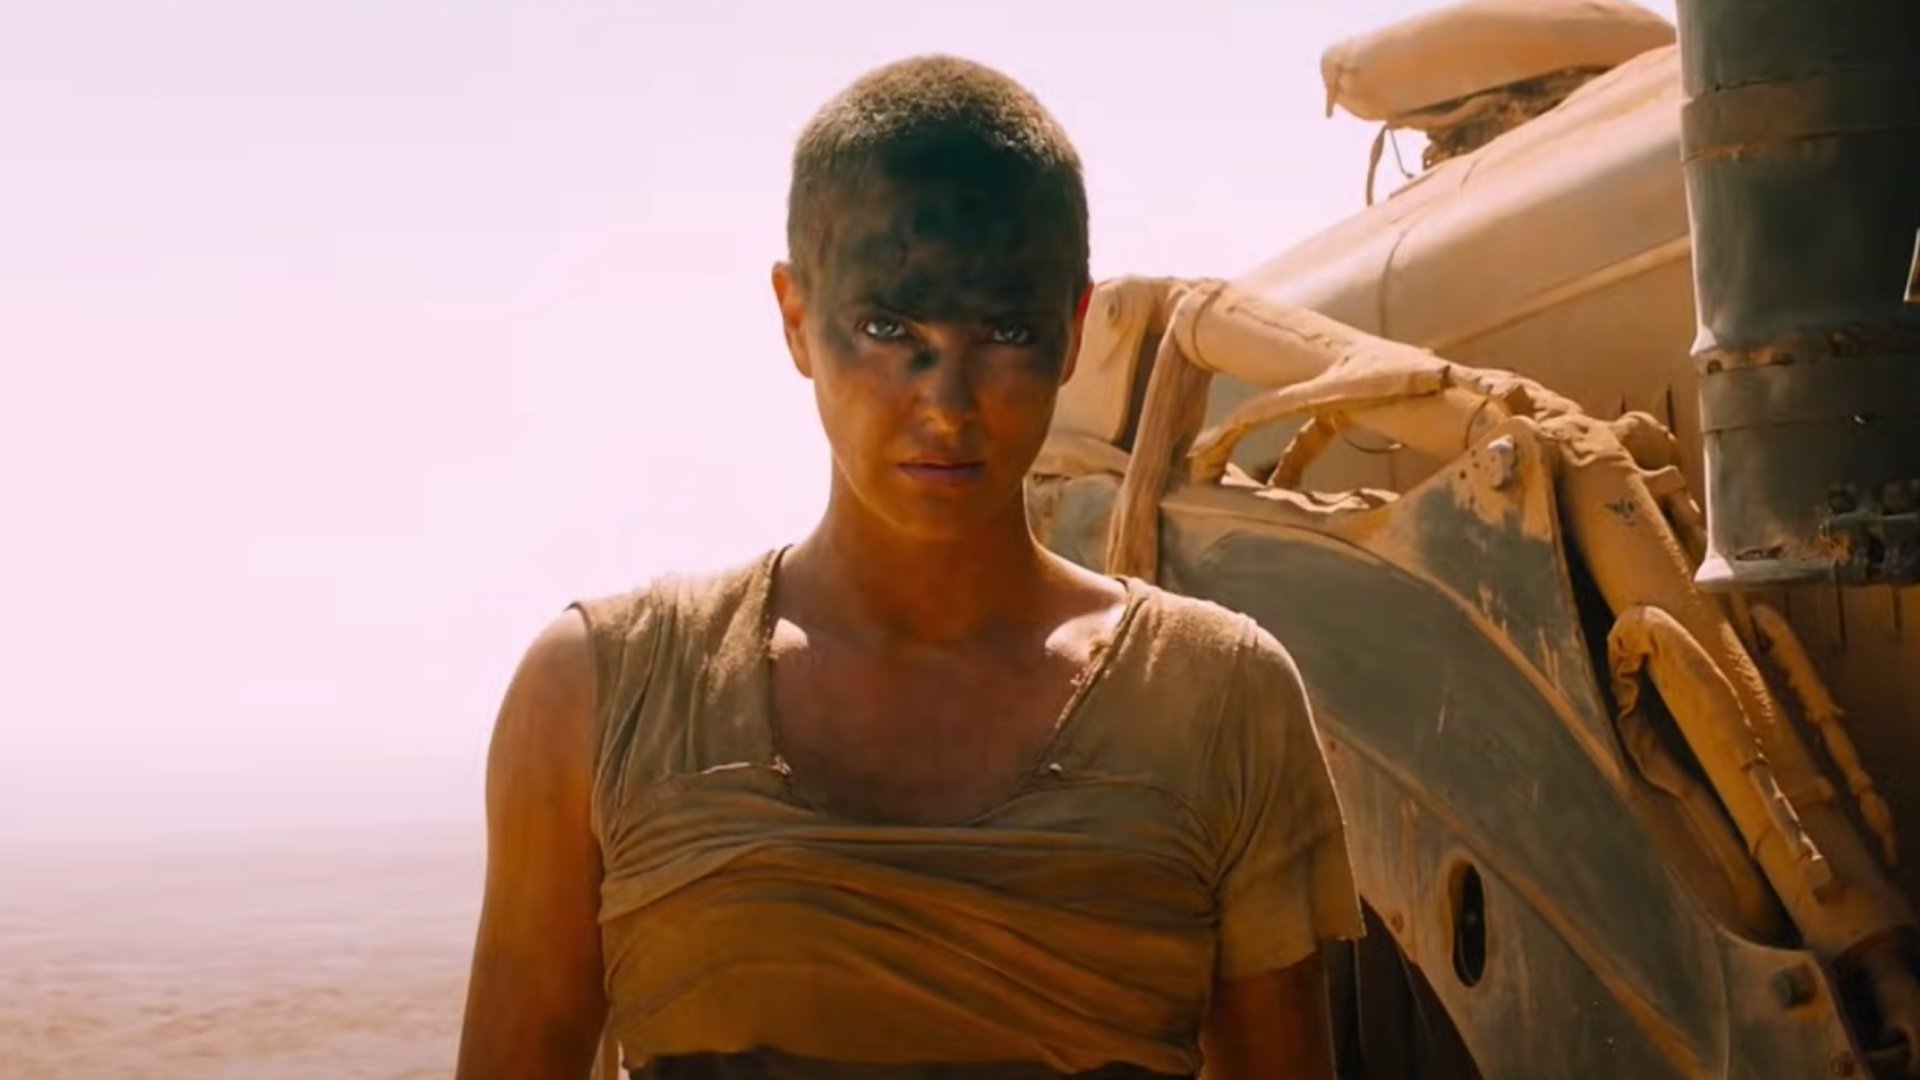 The Mad Max films depict a world increasingly degraded. Furiosa